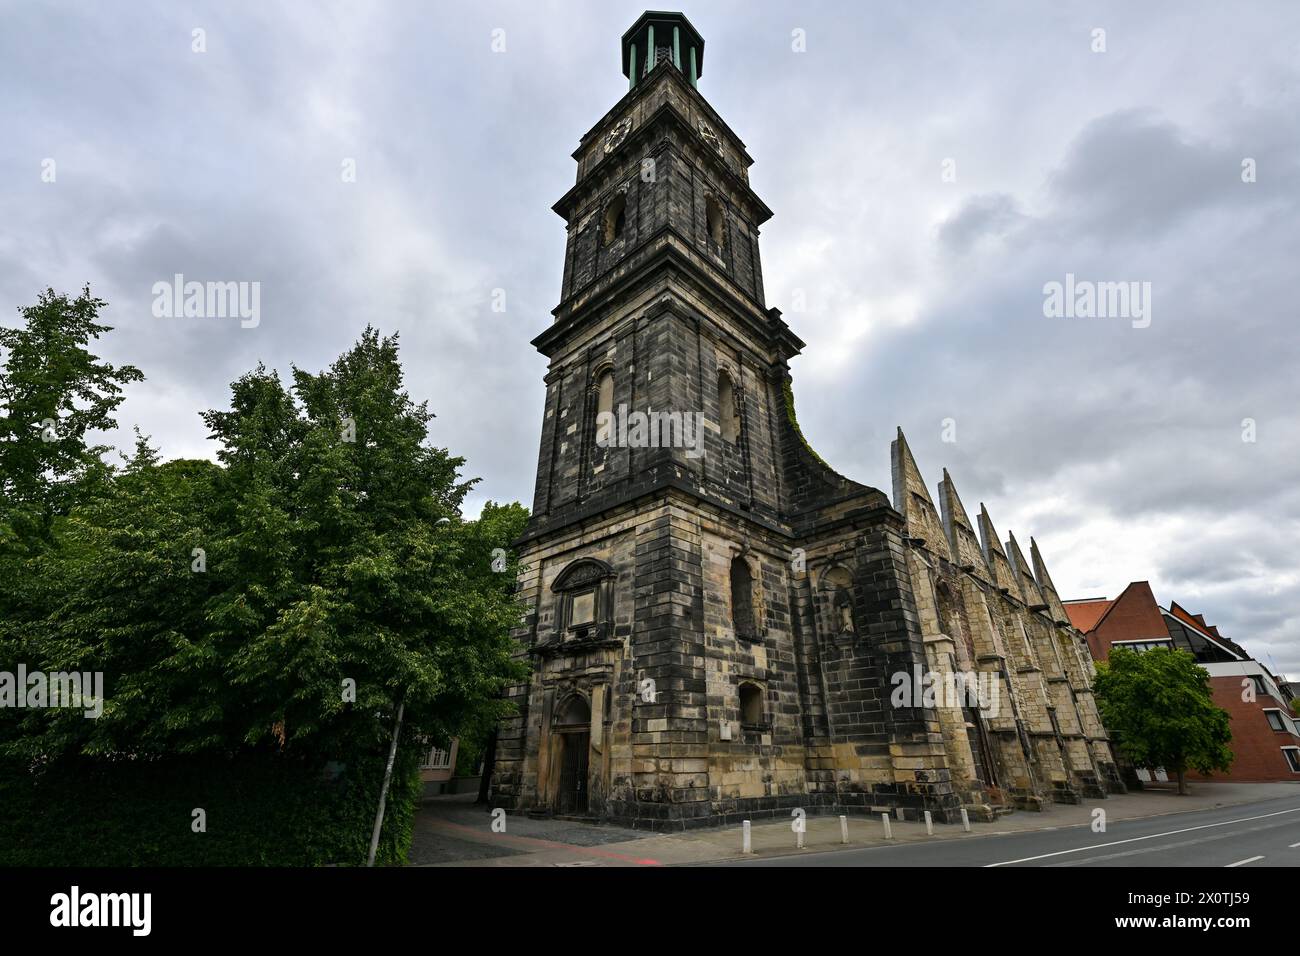 Aegidienkirche is a church in ruins in Hanover city, Germany. Stock Photo